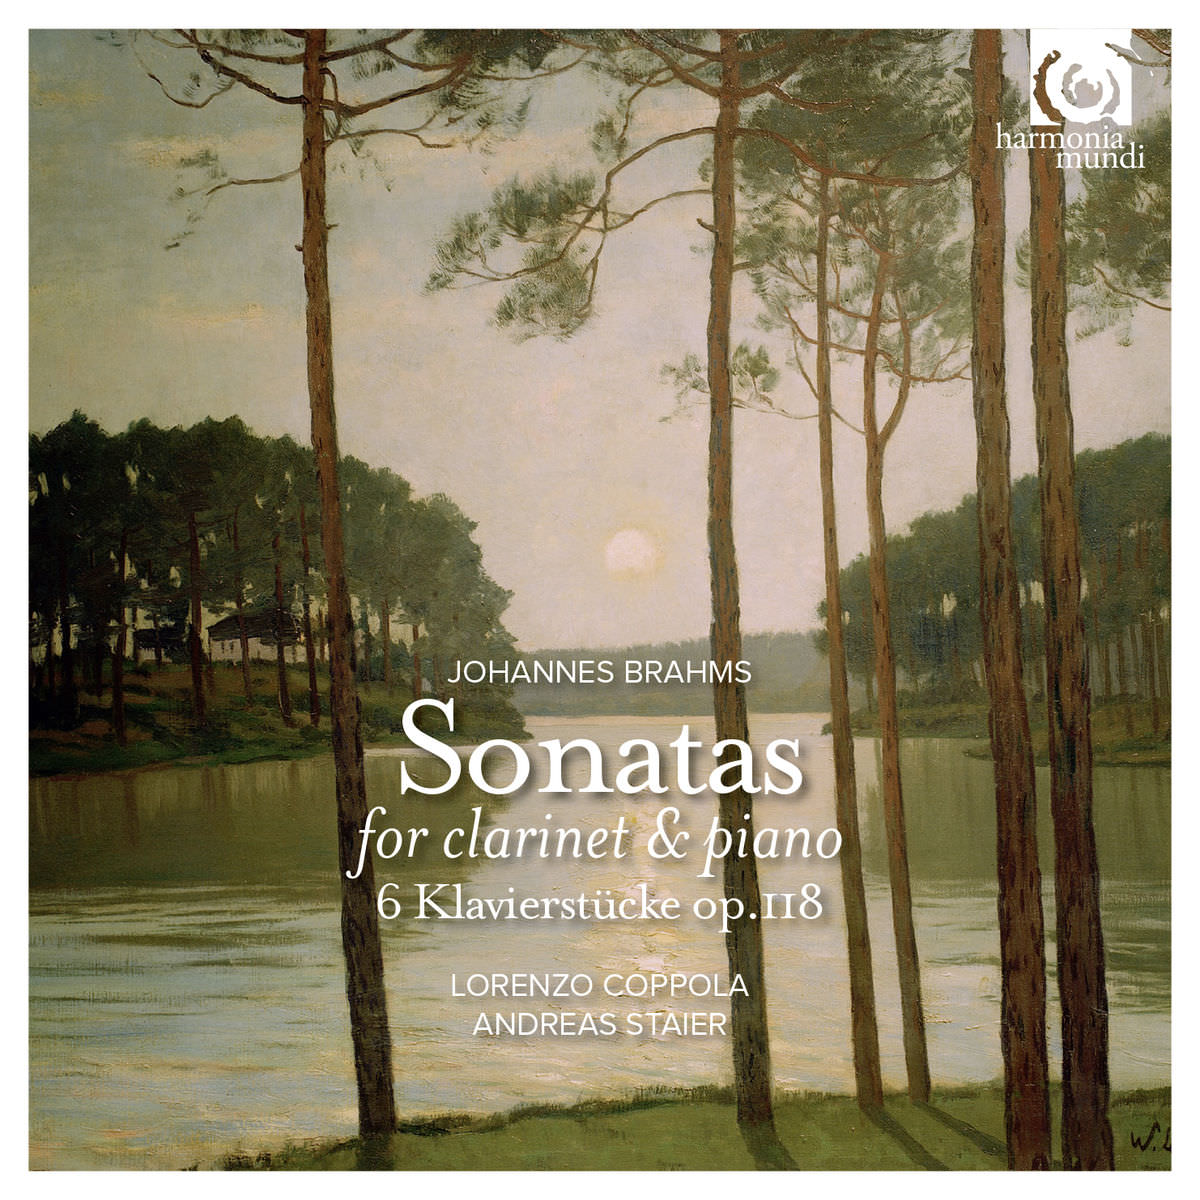 Lorenzo Coppola & Andreas Staier – Brahms: Sonatas for Clarinet and Piano, Op. 120 (2015) [FLAC 24bit/96kHz]